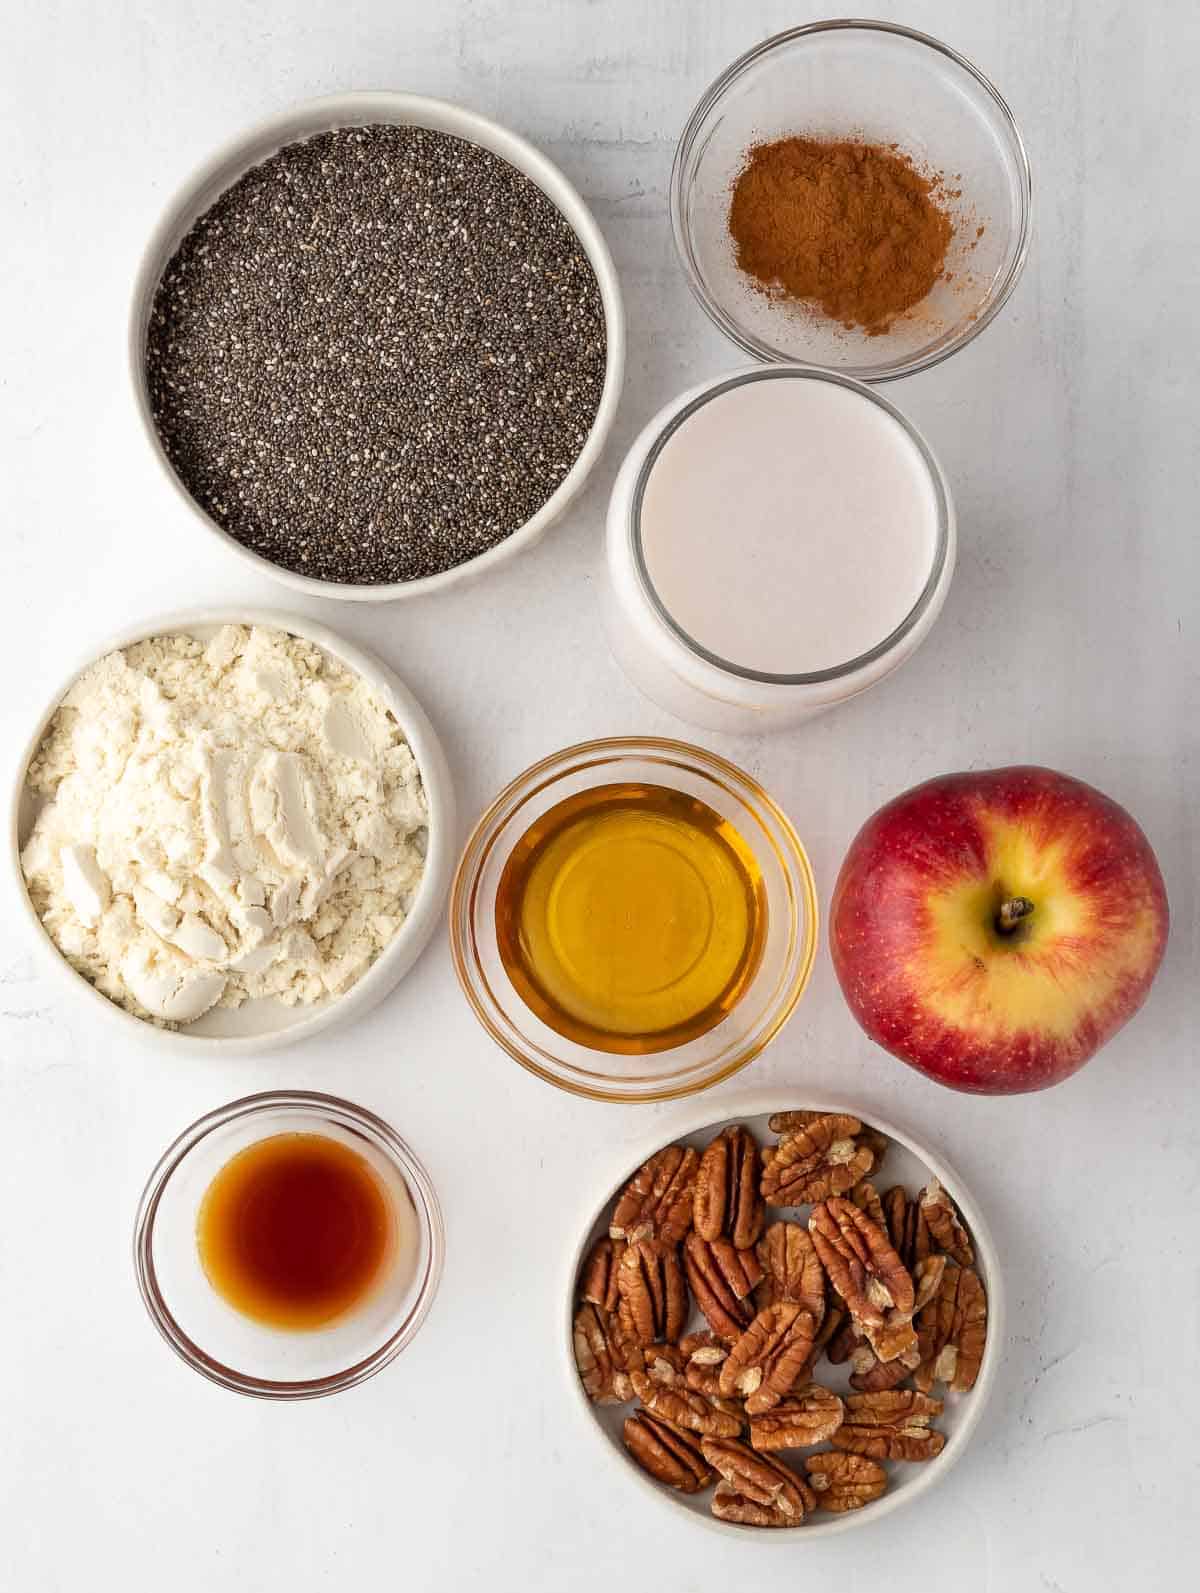 ingredients of the cinnamon apple overnight chia pudding laid out.